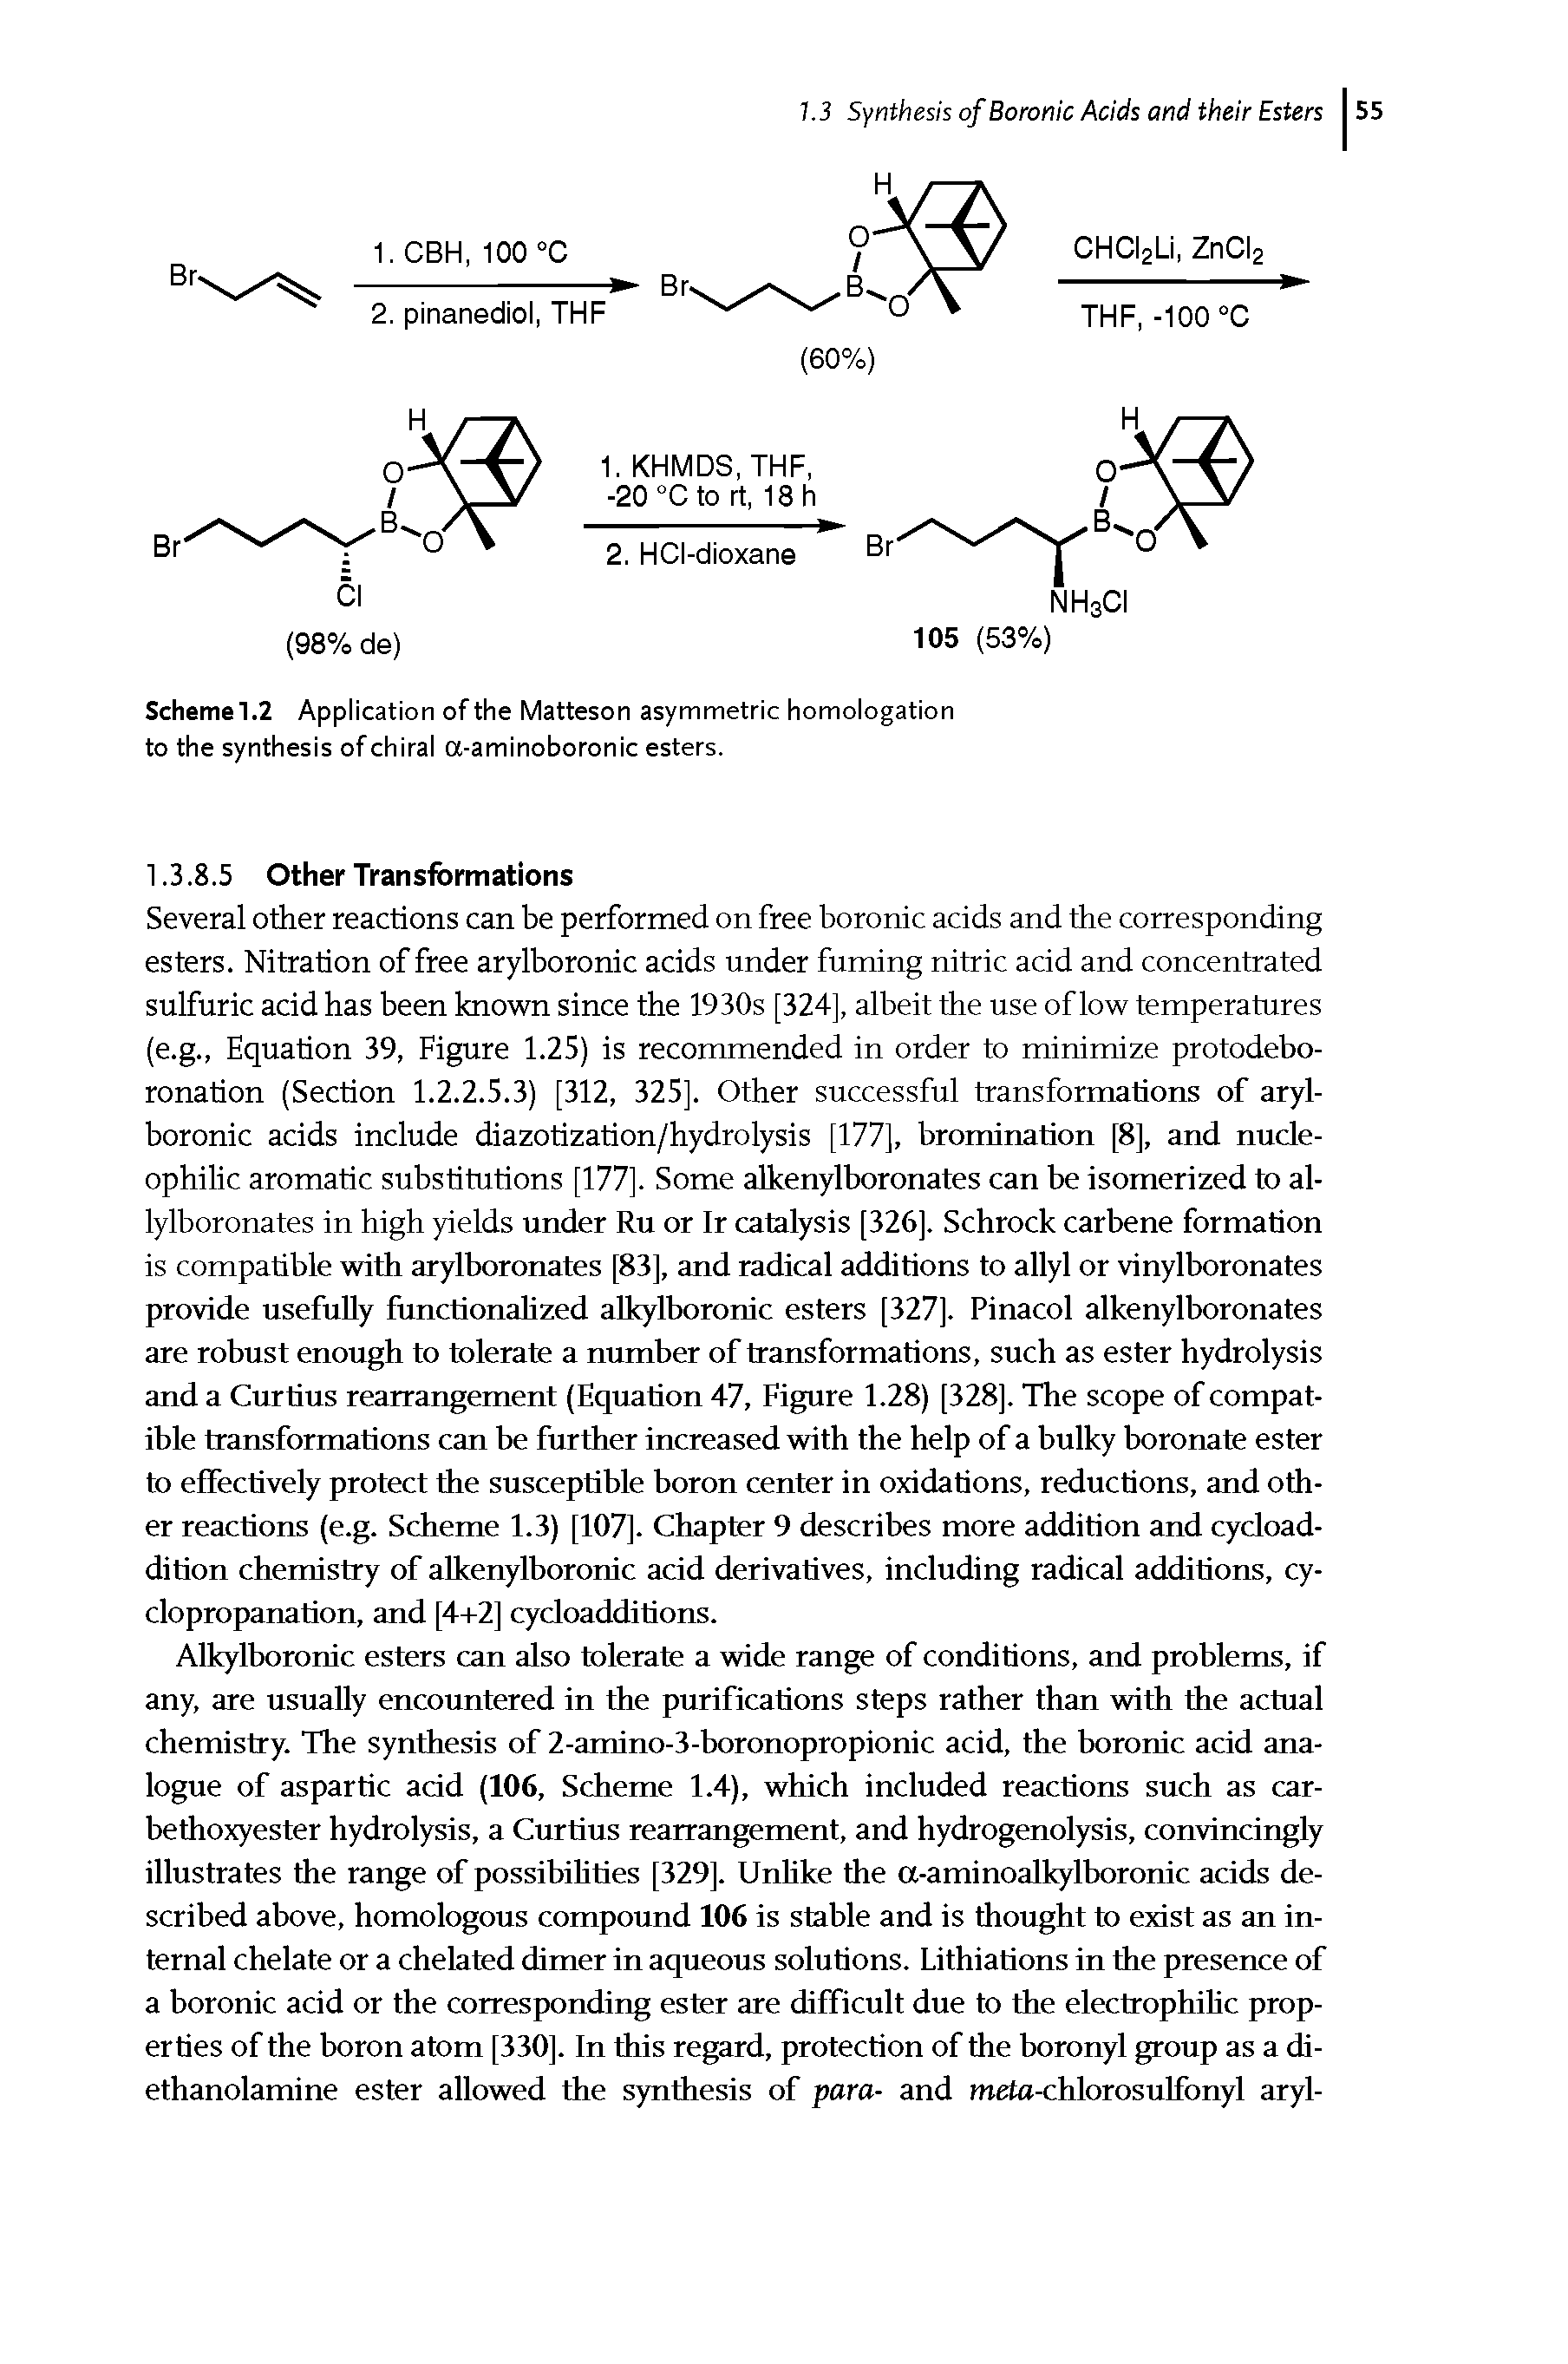 Scheme1.2 Application of the Matteson asymmetric homologation to the synthesis of chiral a-aminoboronic esters.